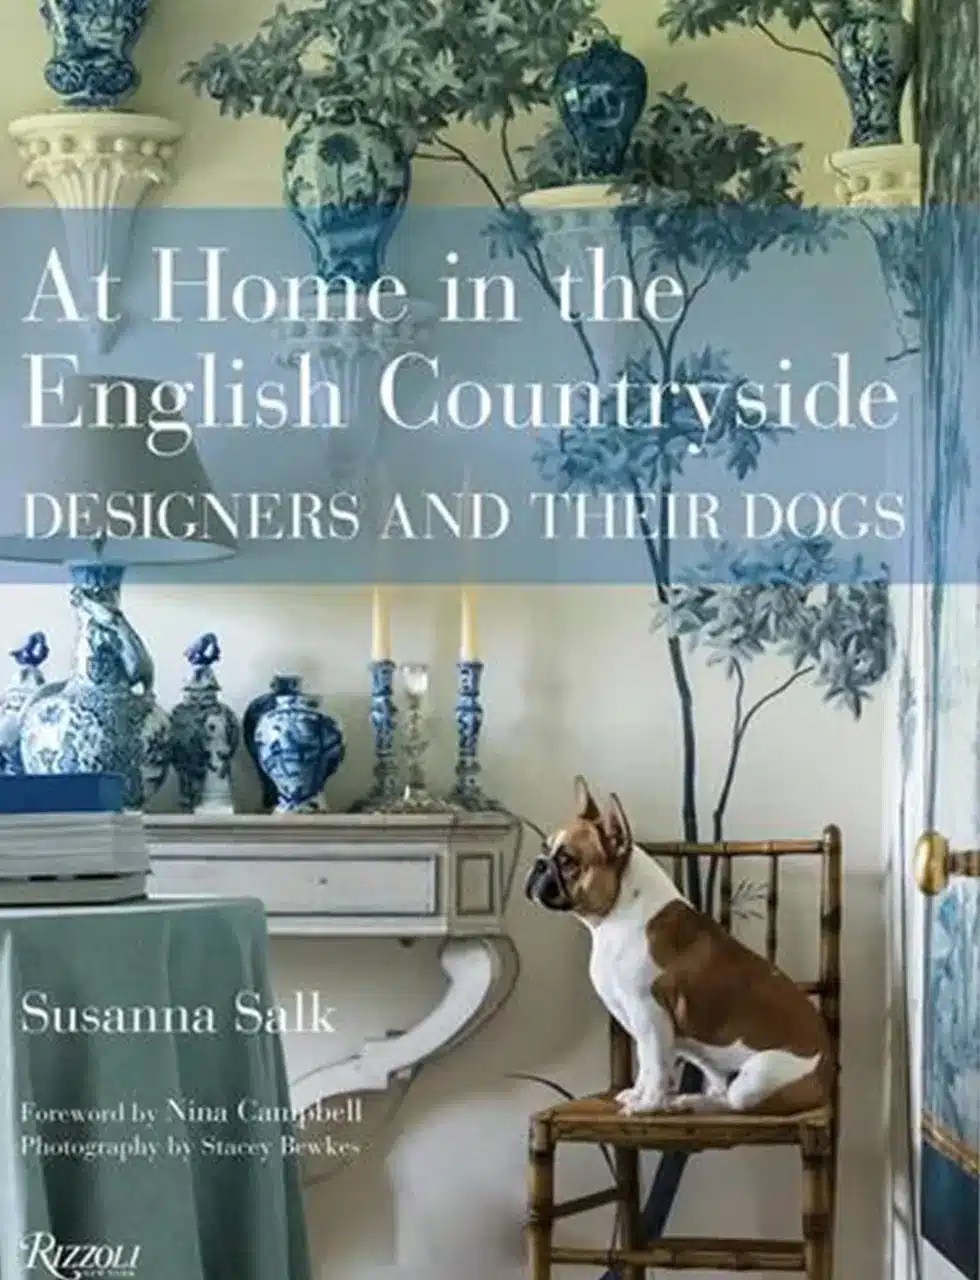 At home in the english countryside book about dogs and design in the country